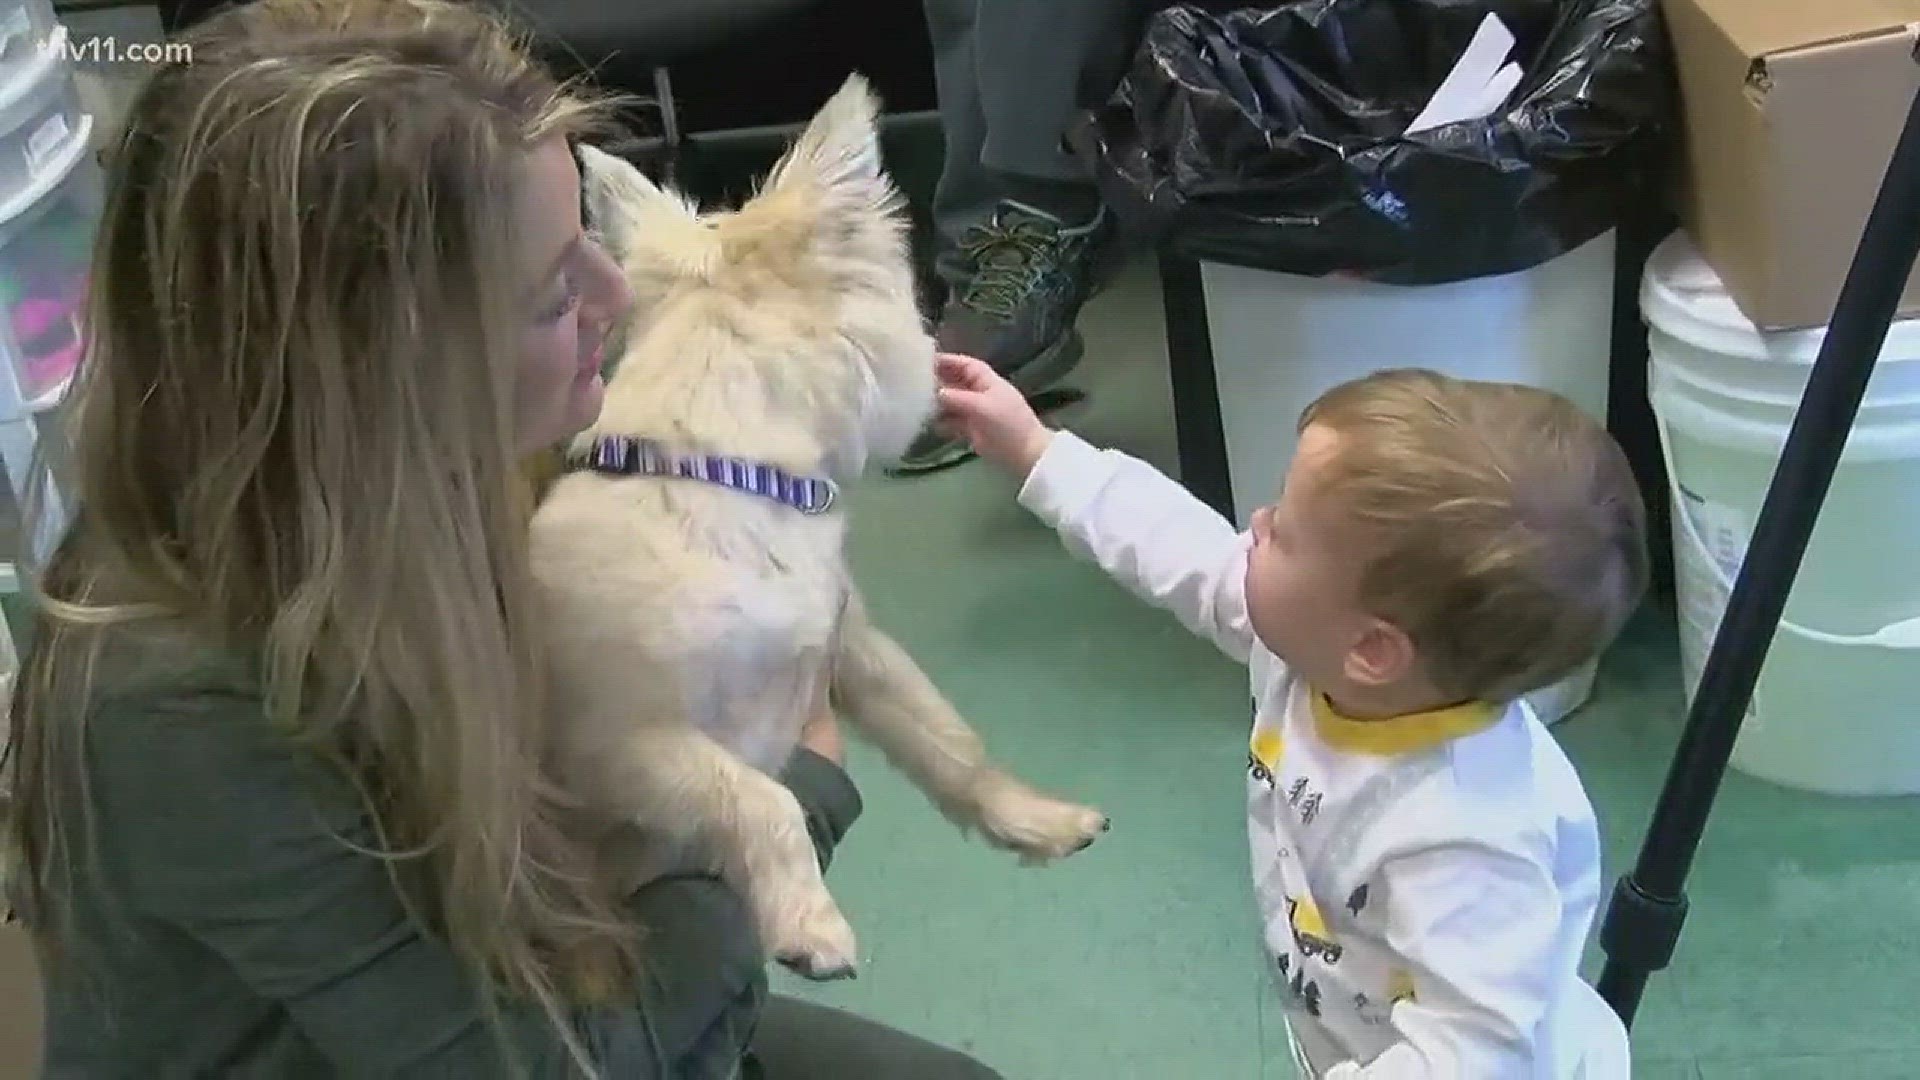 A dog that was separated from his family for more than three years has been reunited with his family.